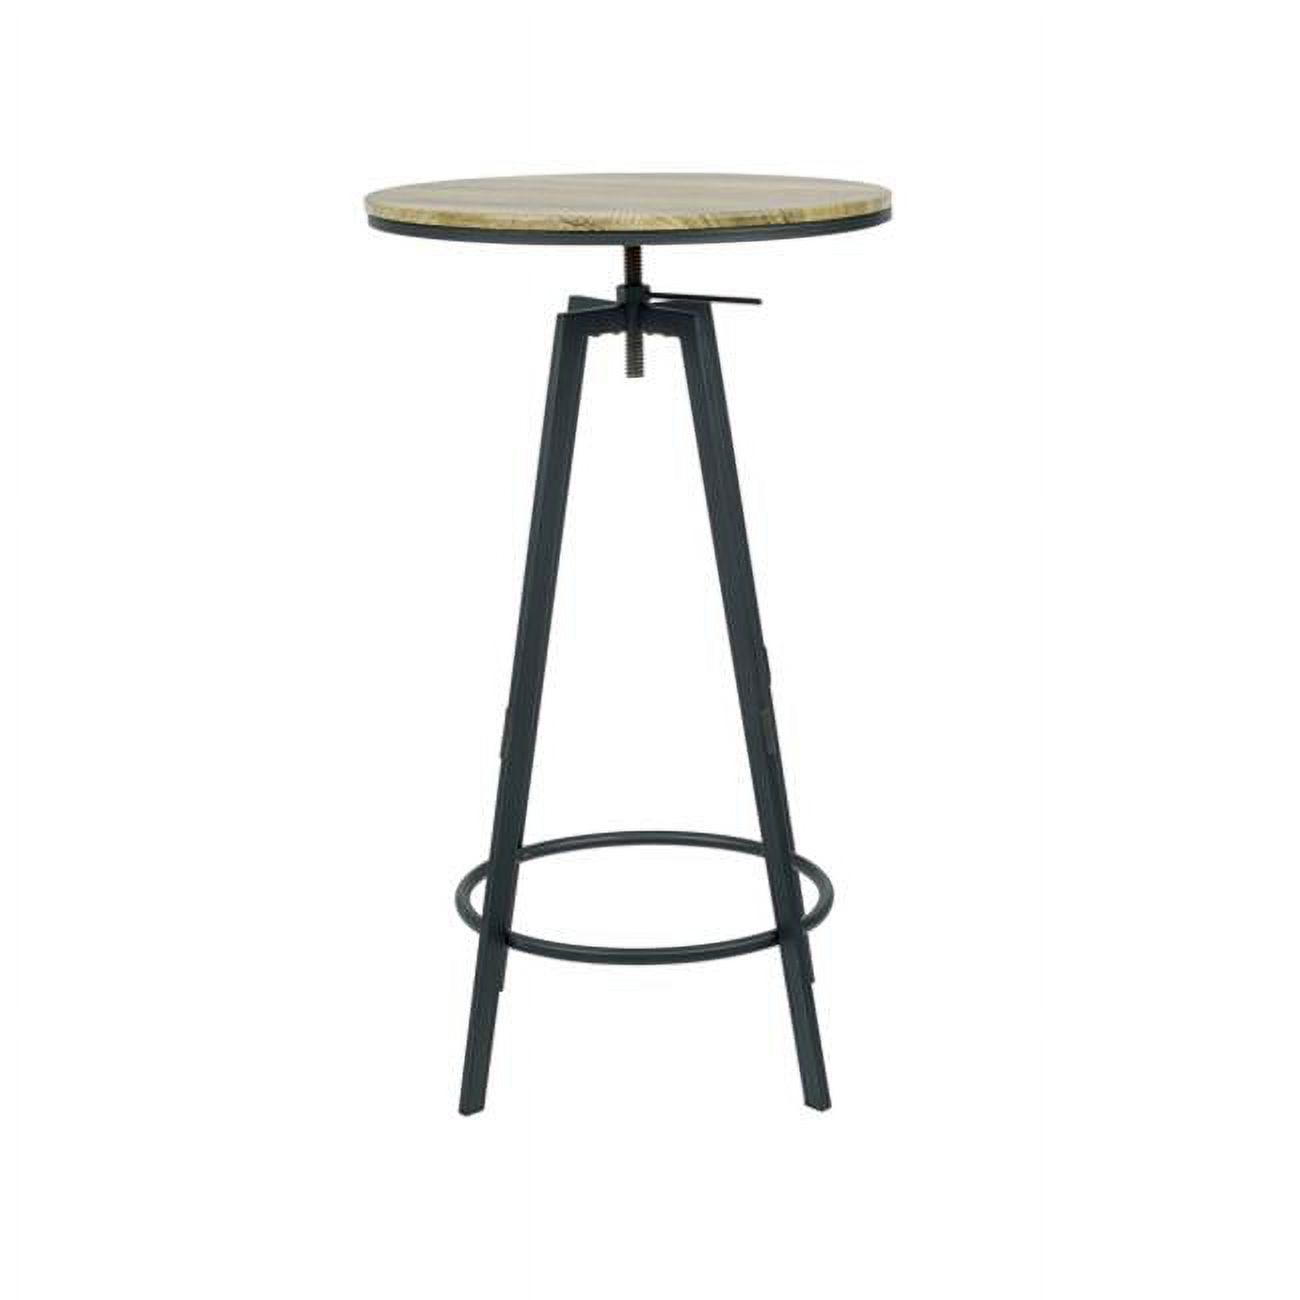 Vintage Industrial Adjustable 24 in. Round Swivel Table with Wood Top - image 1 of 1